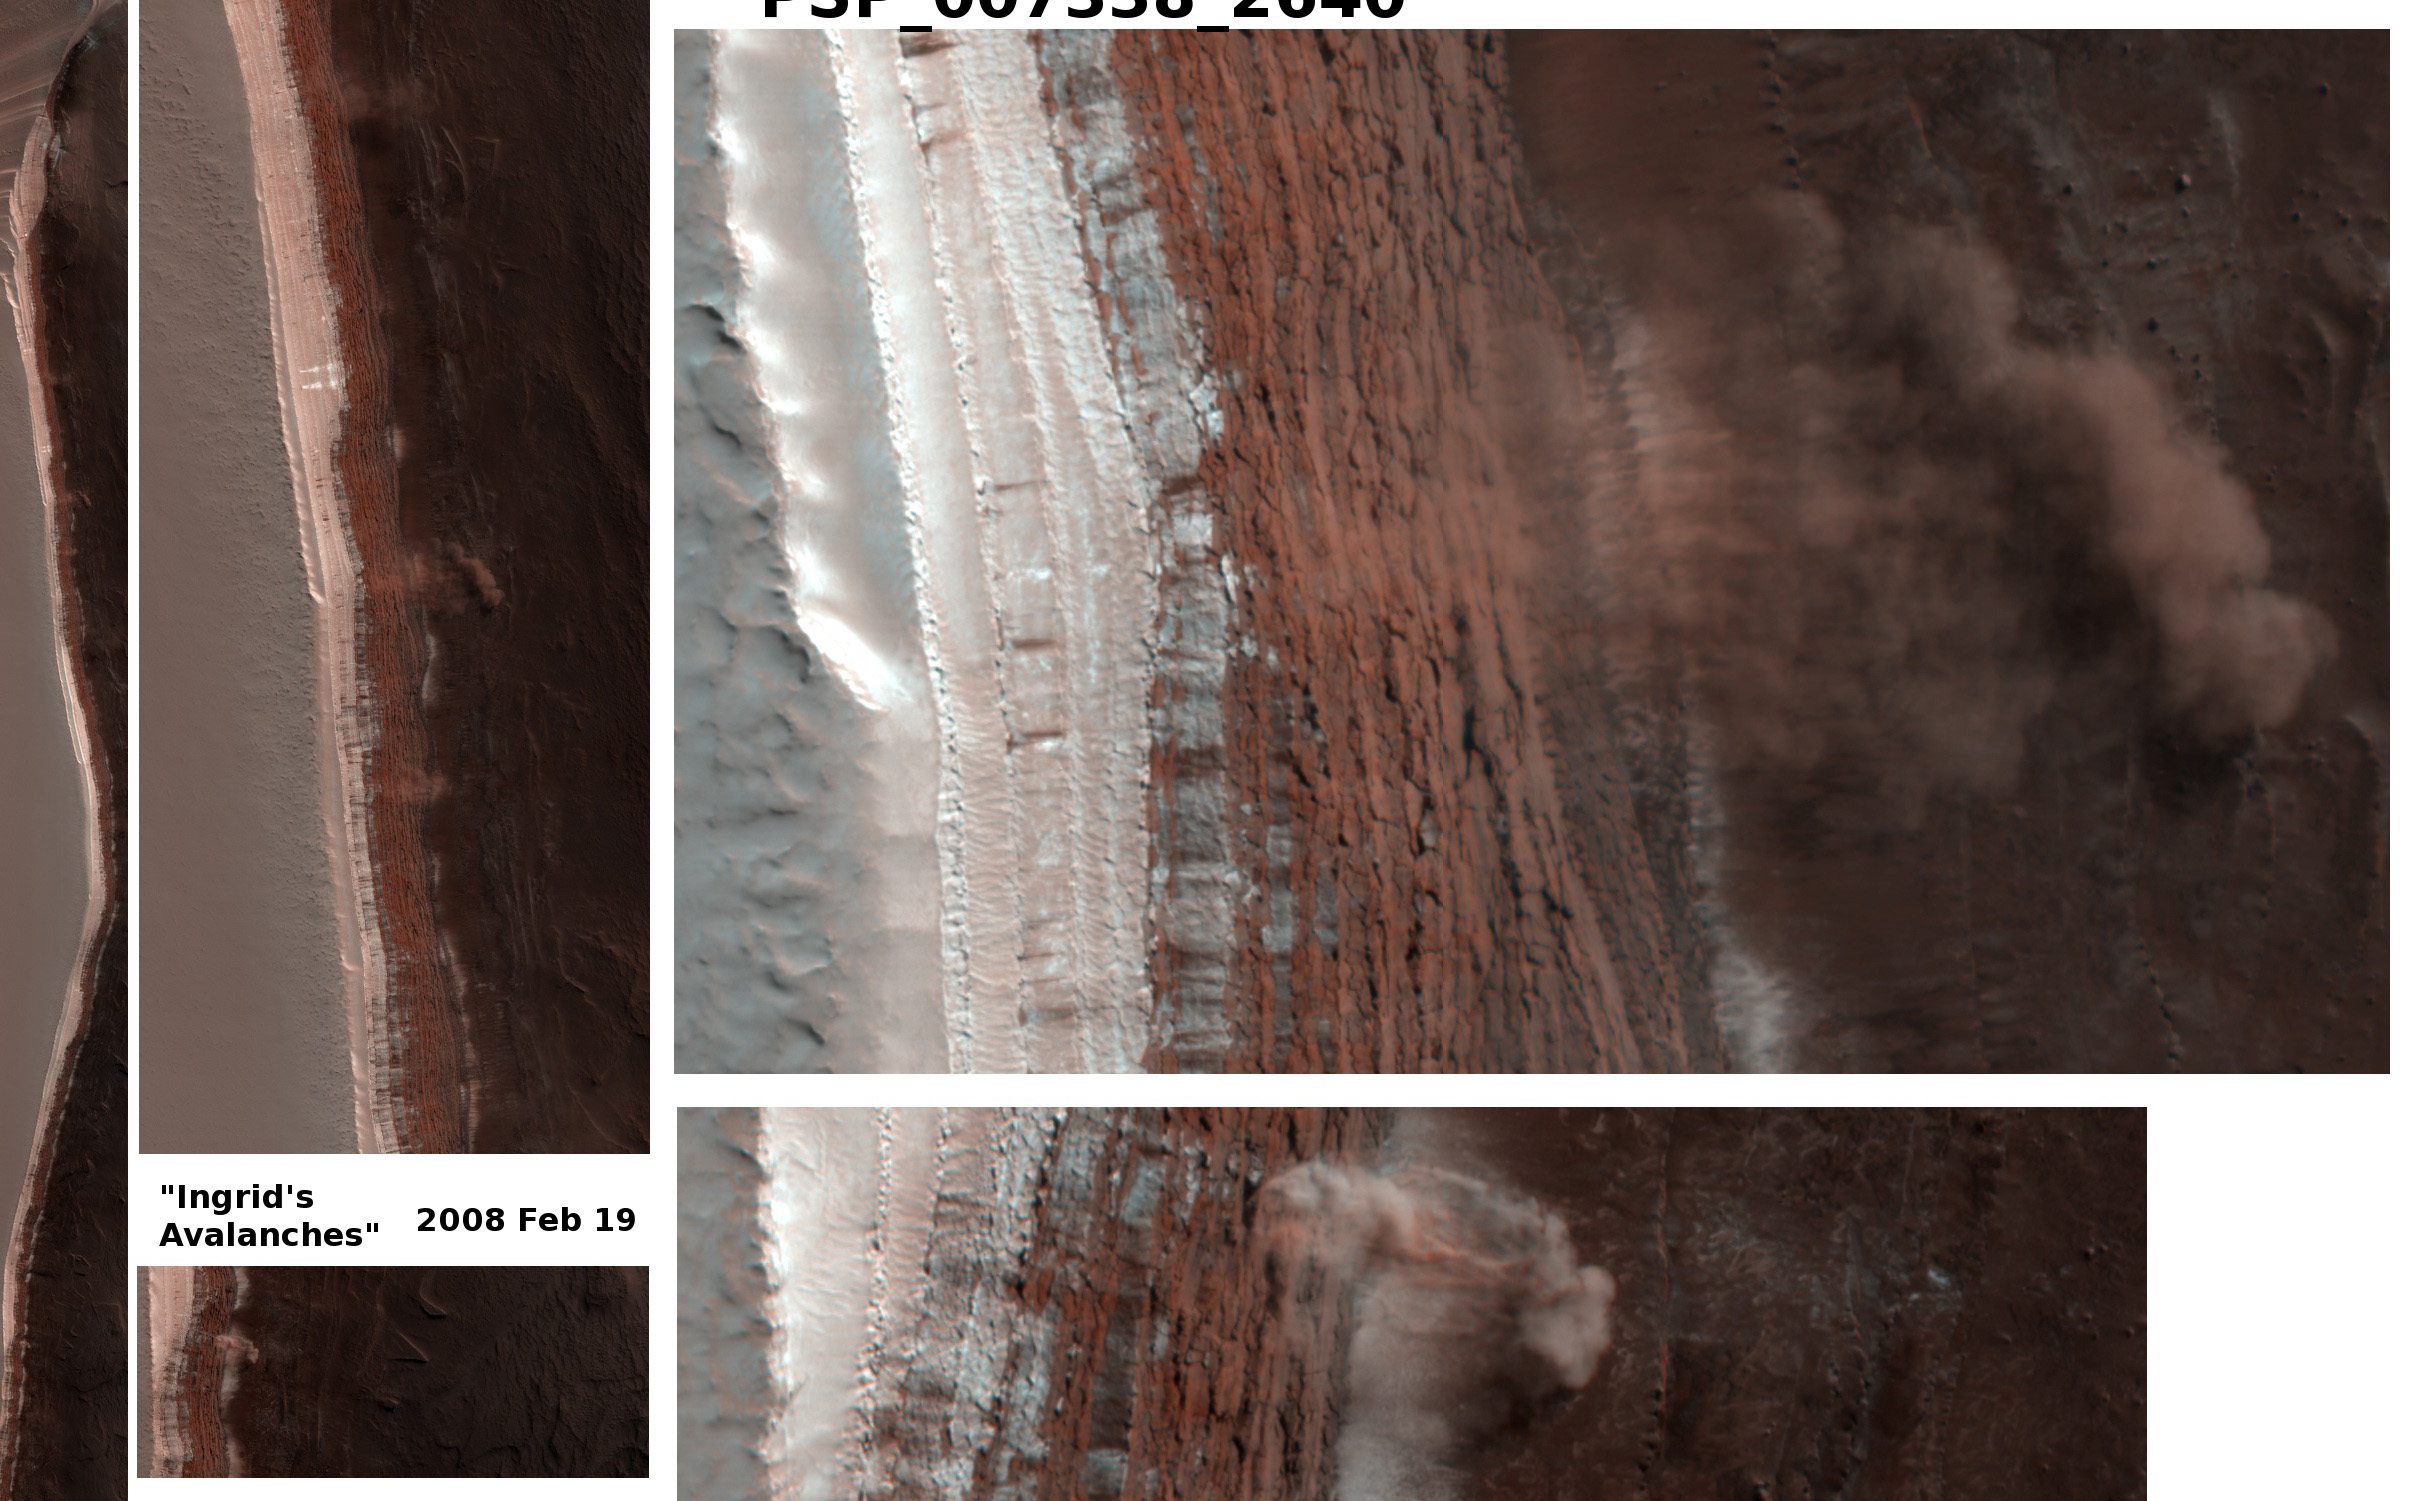 Caught in Action: This image shows avalanches on North Polar Scarps.